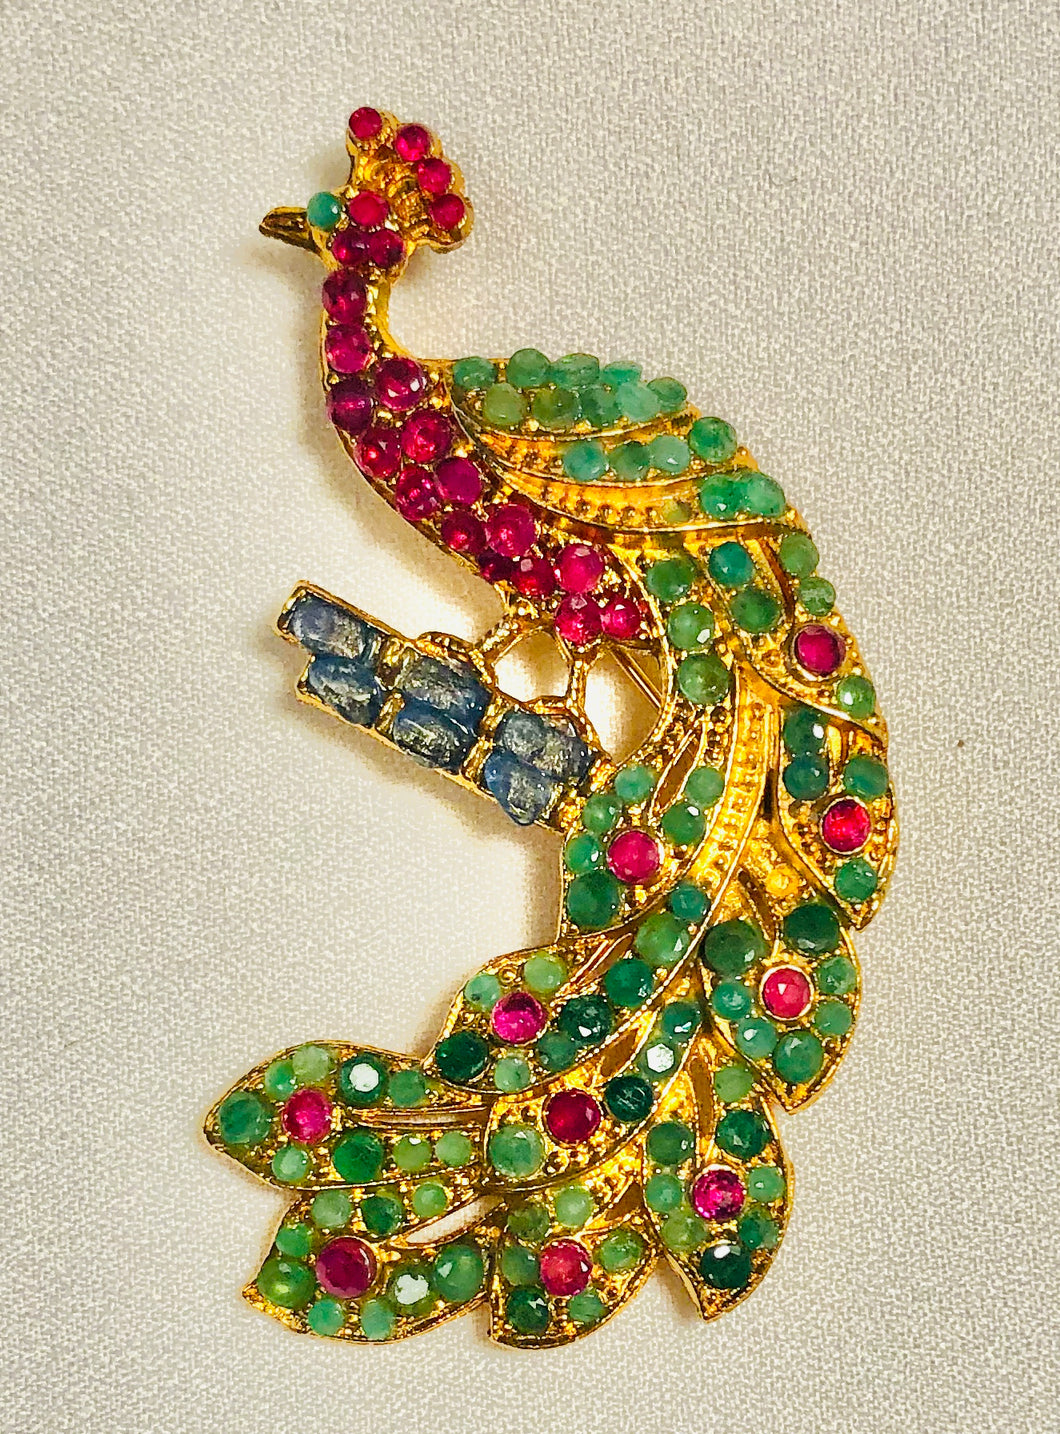 Genuine Emerald, Ruby and Sapphire Perched Peacock Brooch